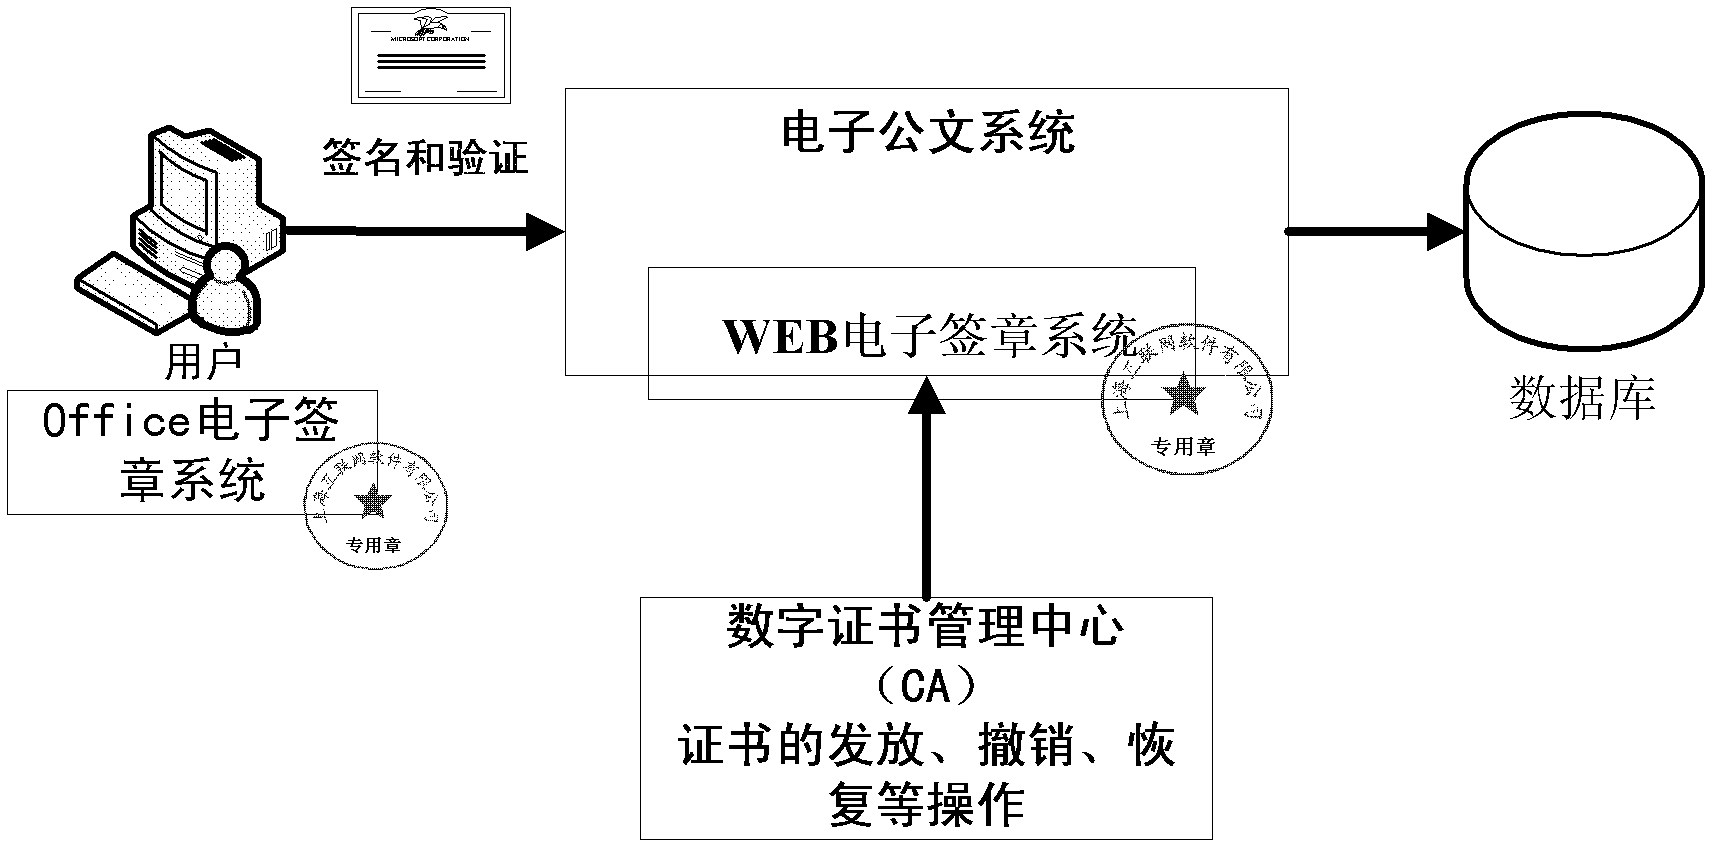 Electronic government document handling system